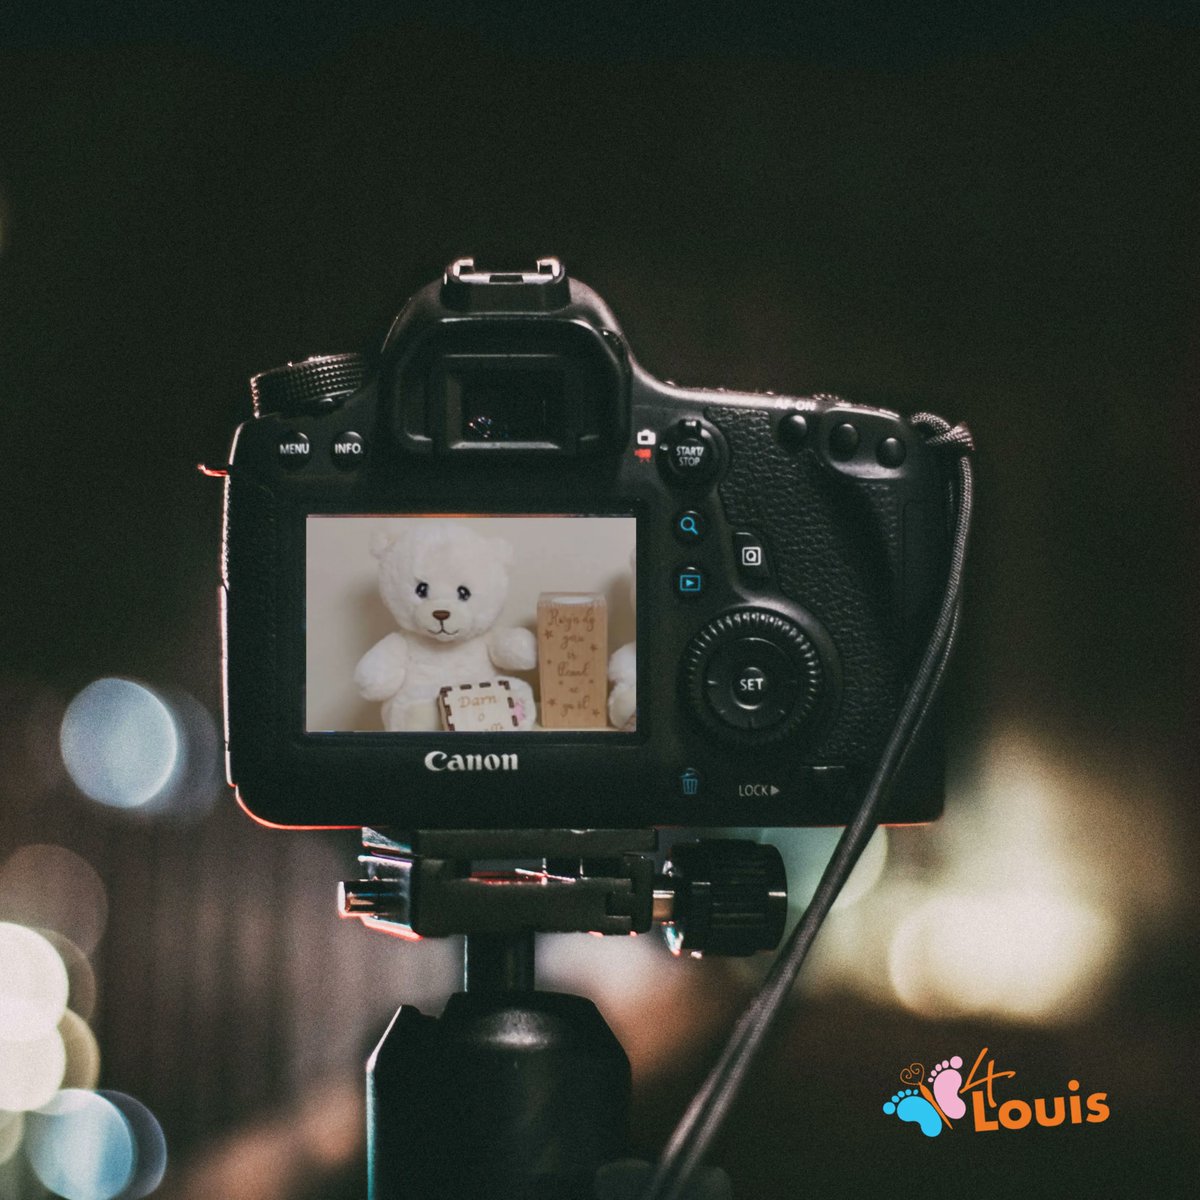 4Louis charity is in need of your help! we are looking for a local videographer or photographer who is willing to volunteer their skills to support our cause.